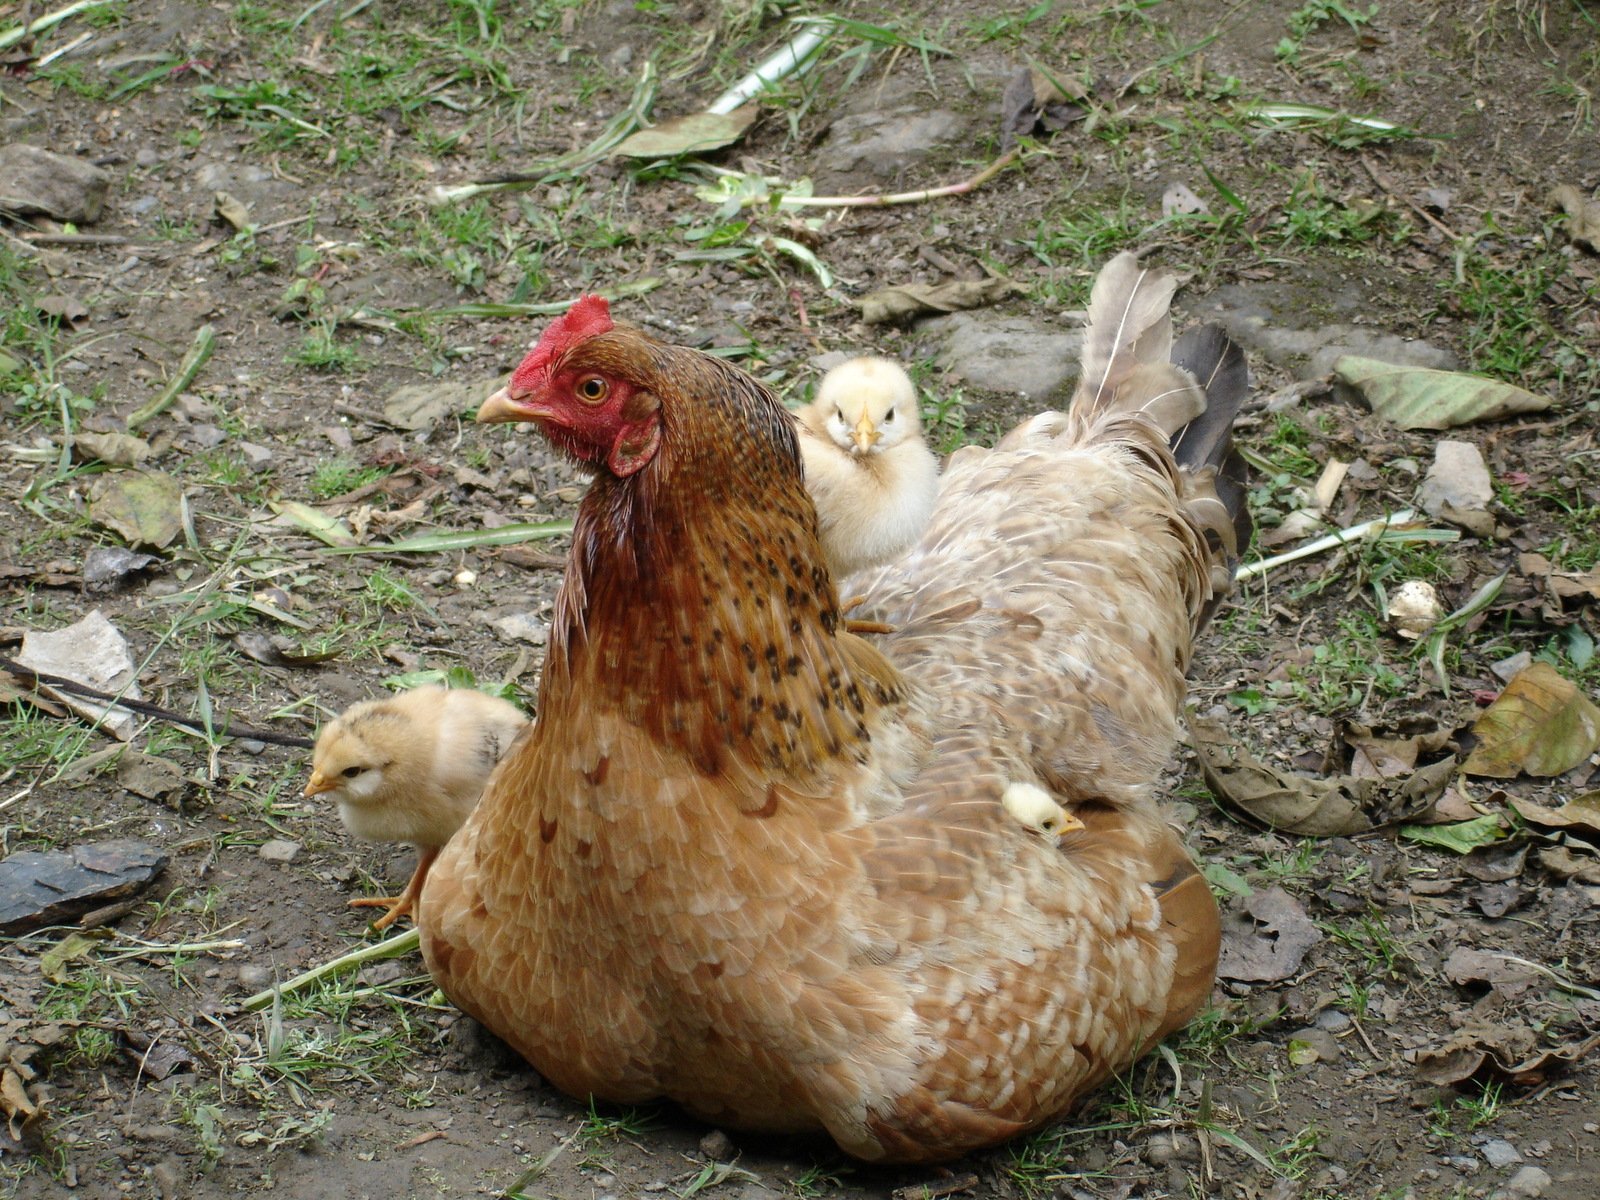 an adult chicken and two small chicks laying in the dirt